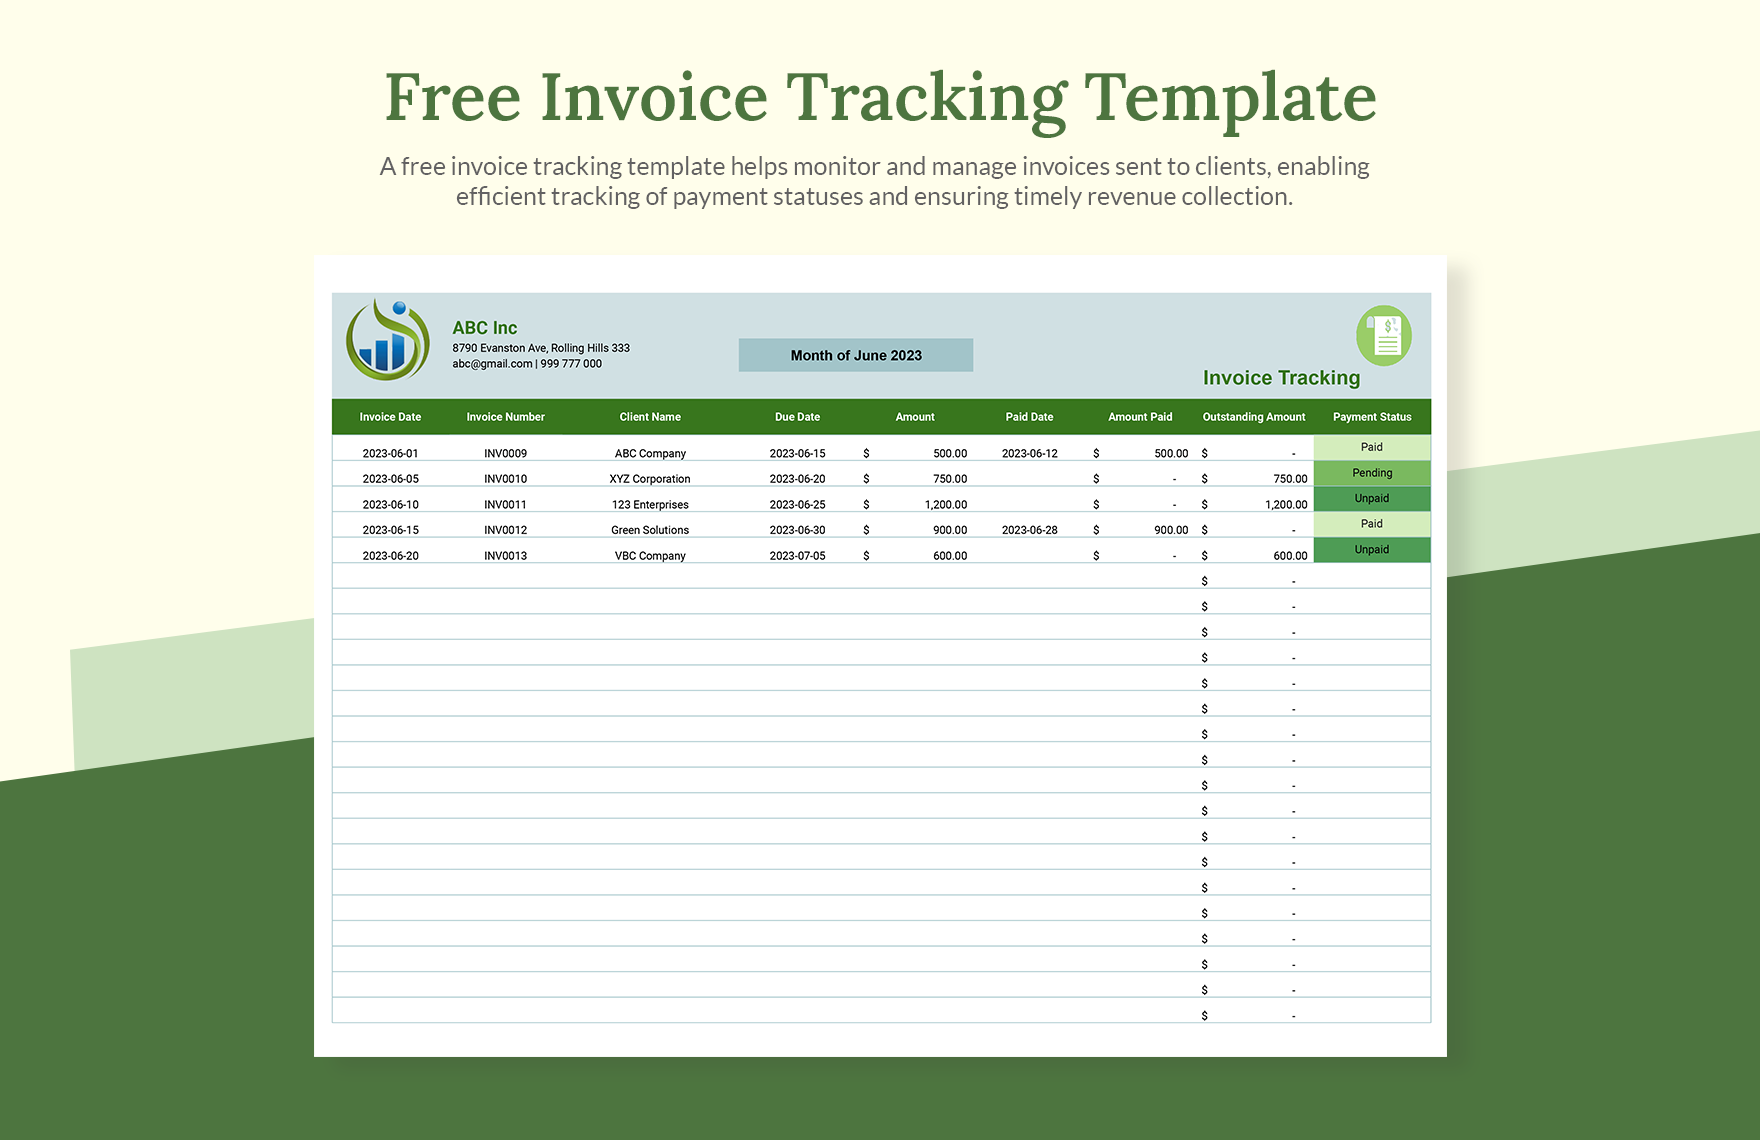 Free Invoice Tracking Template